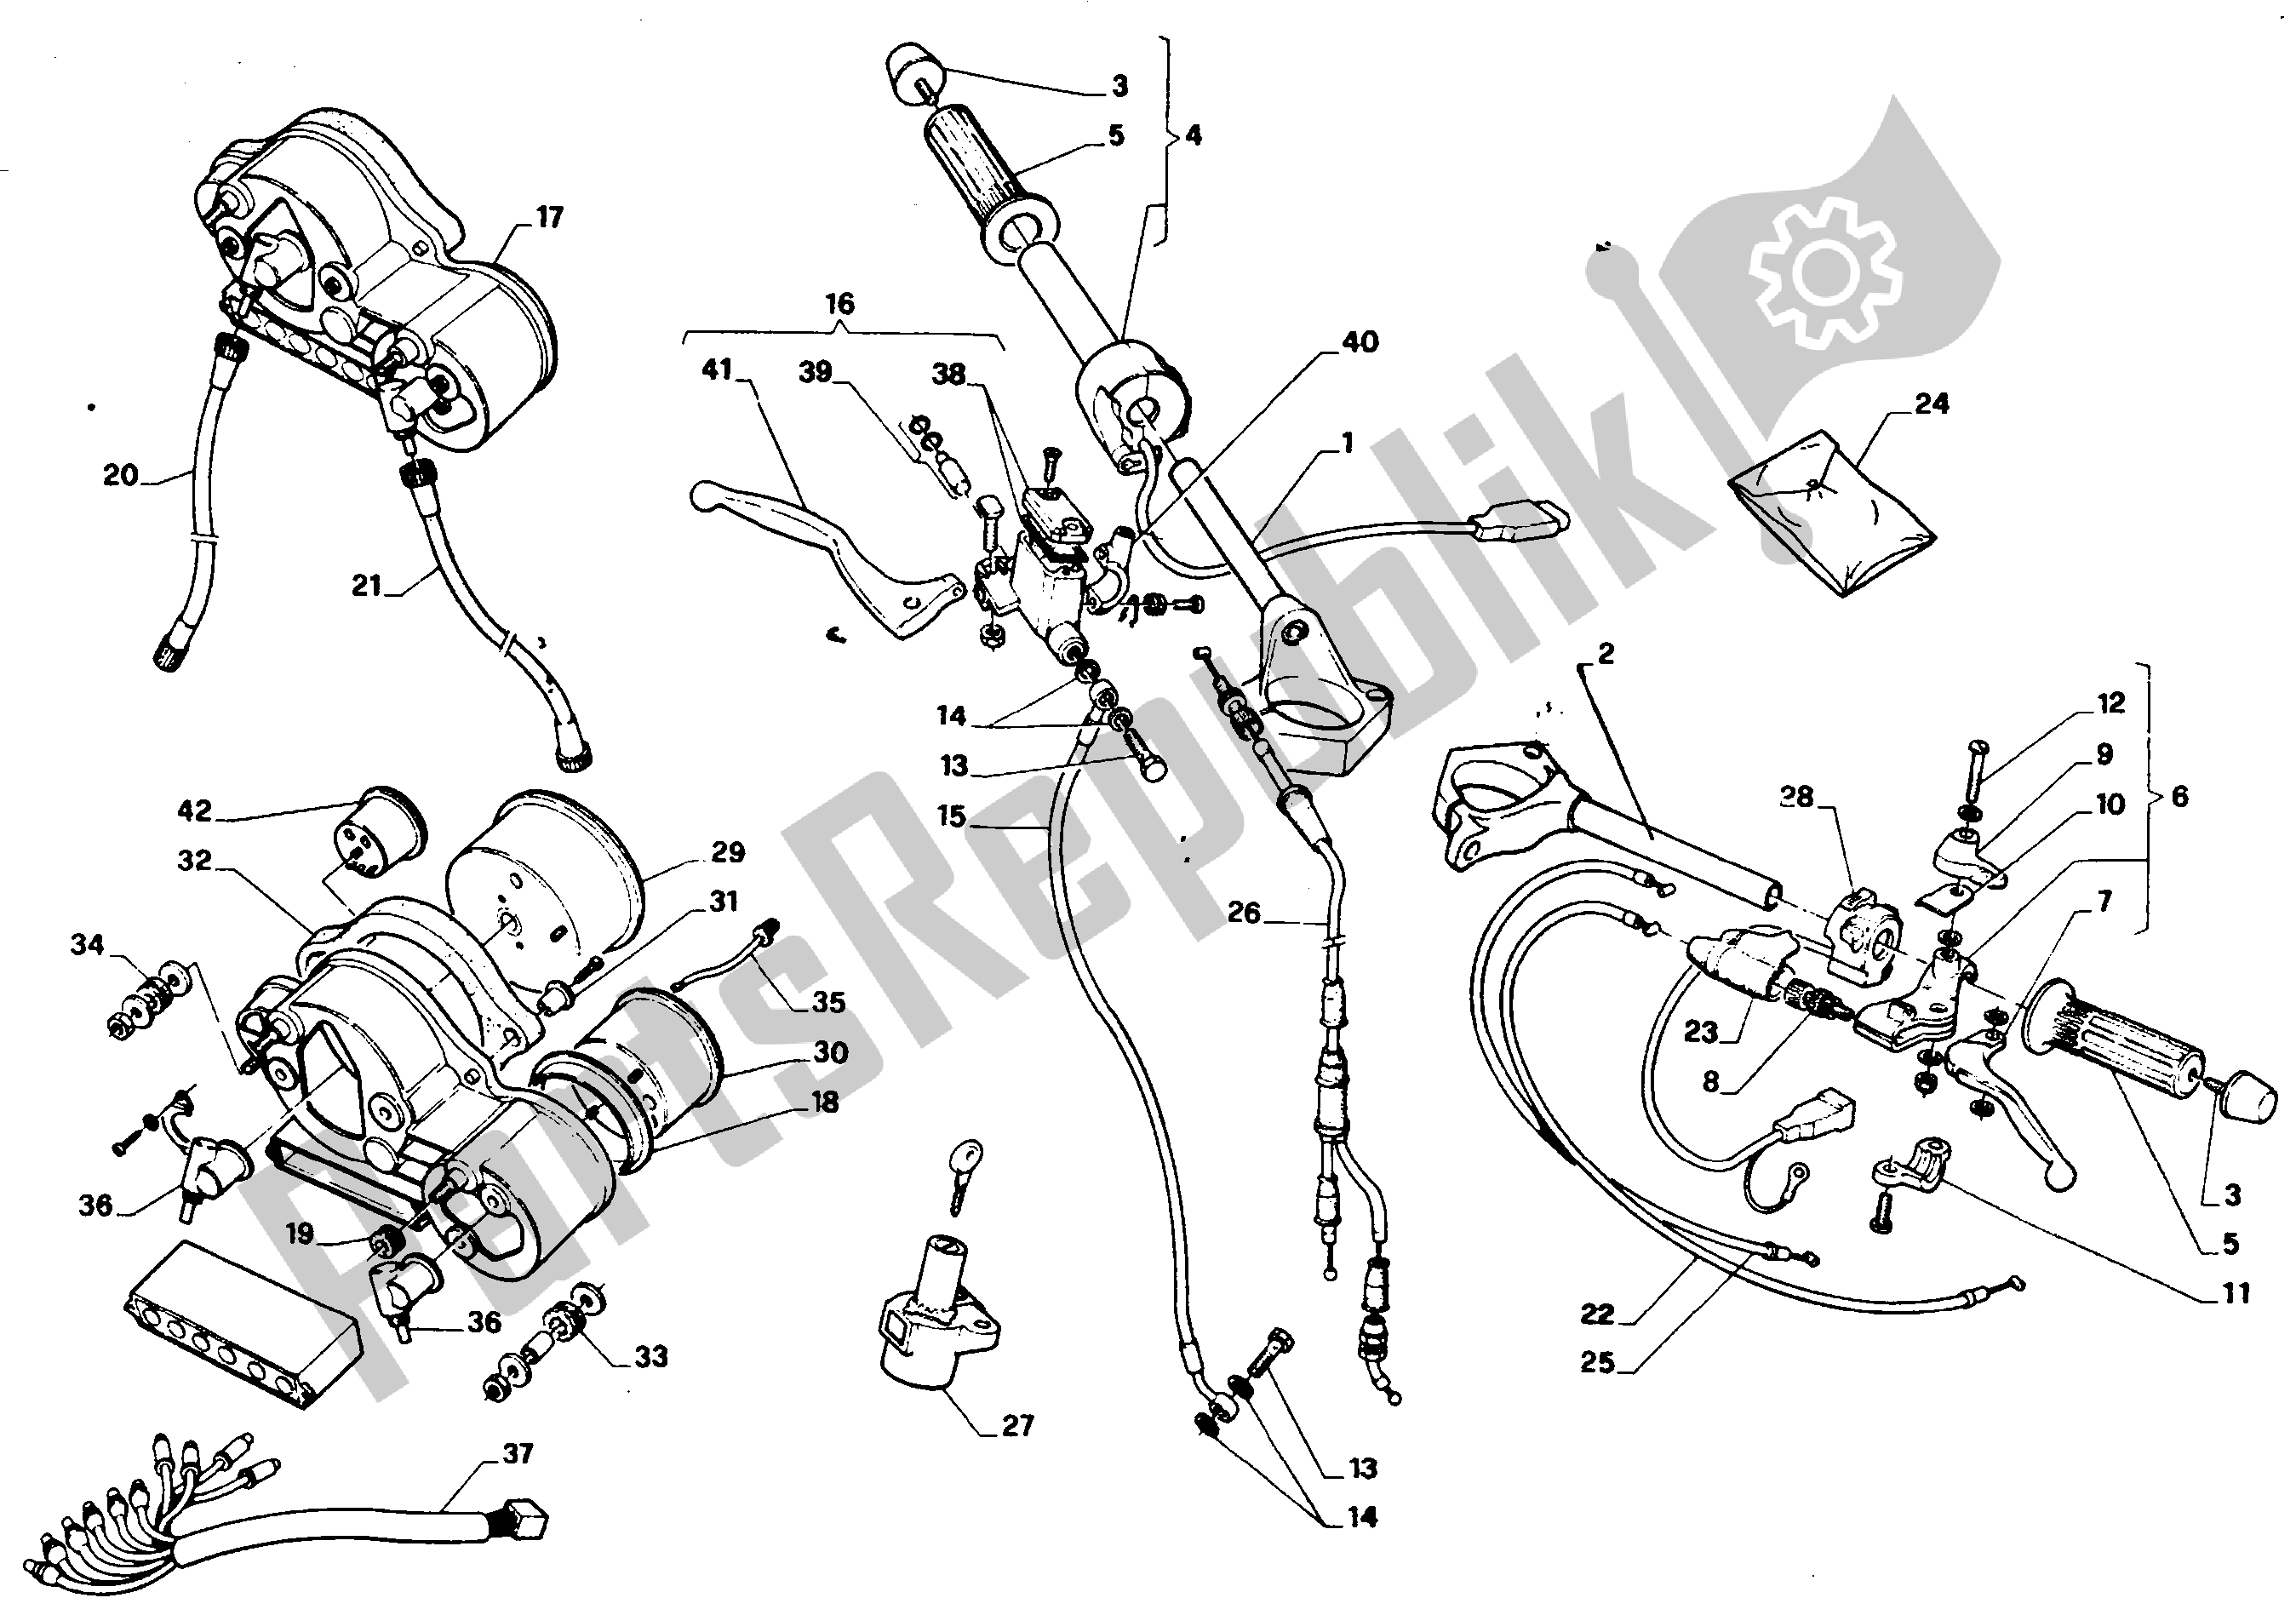 All parts for the Handle Bars And Commands of the Aprilia AF1 125 1989